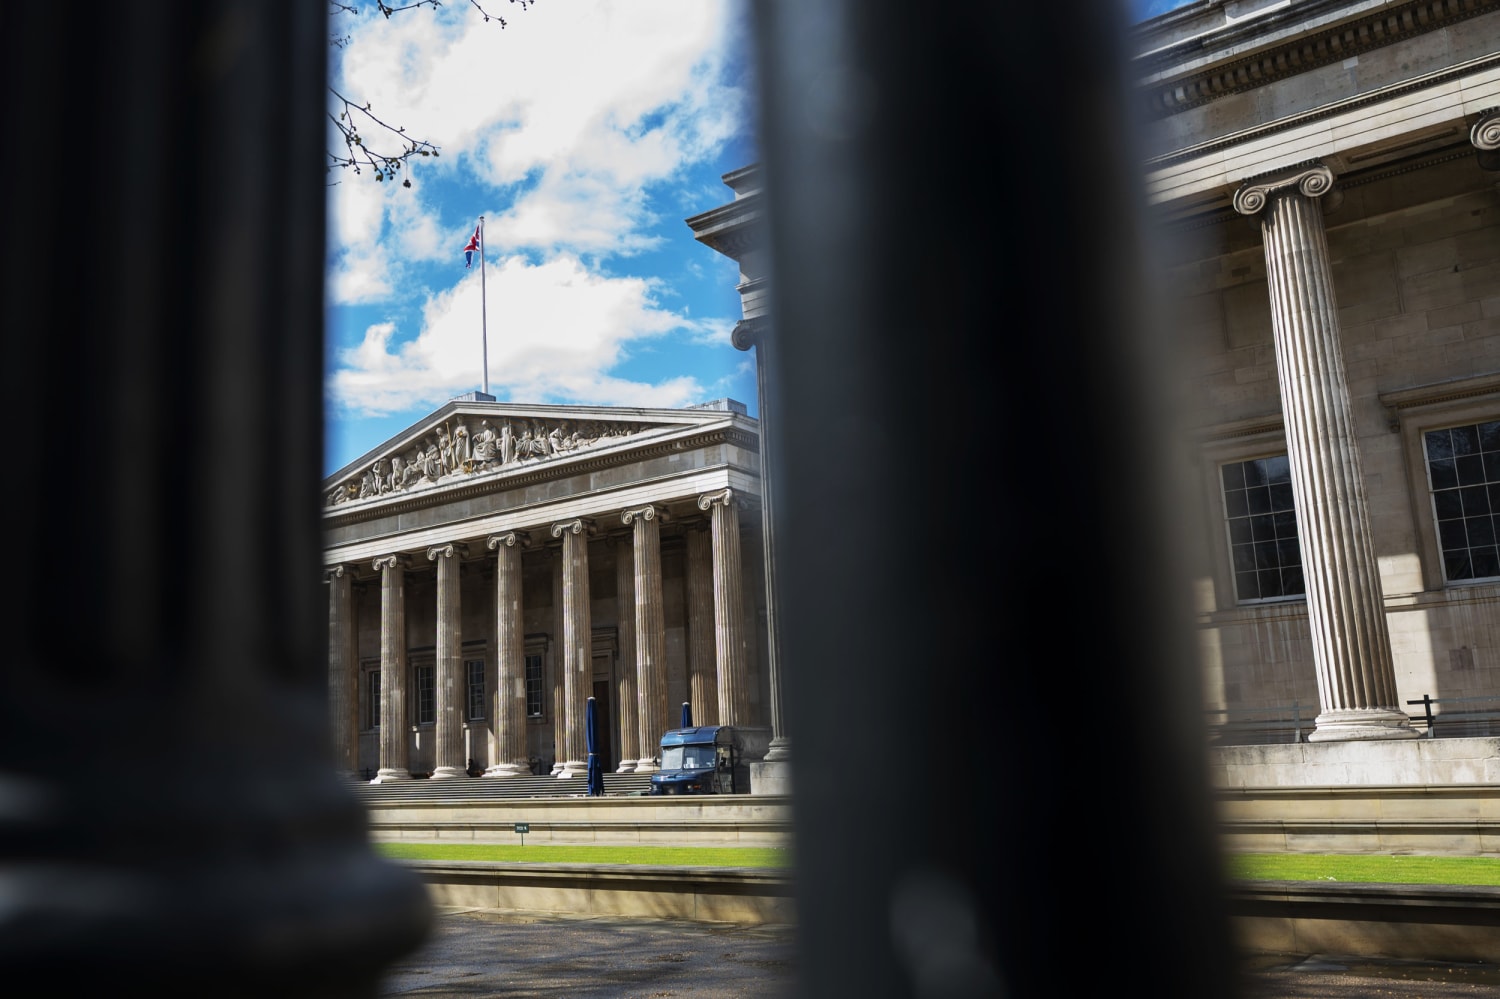 British Museum says staff member dismissed after items were found to be missing, stolen or damaged